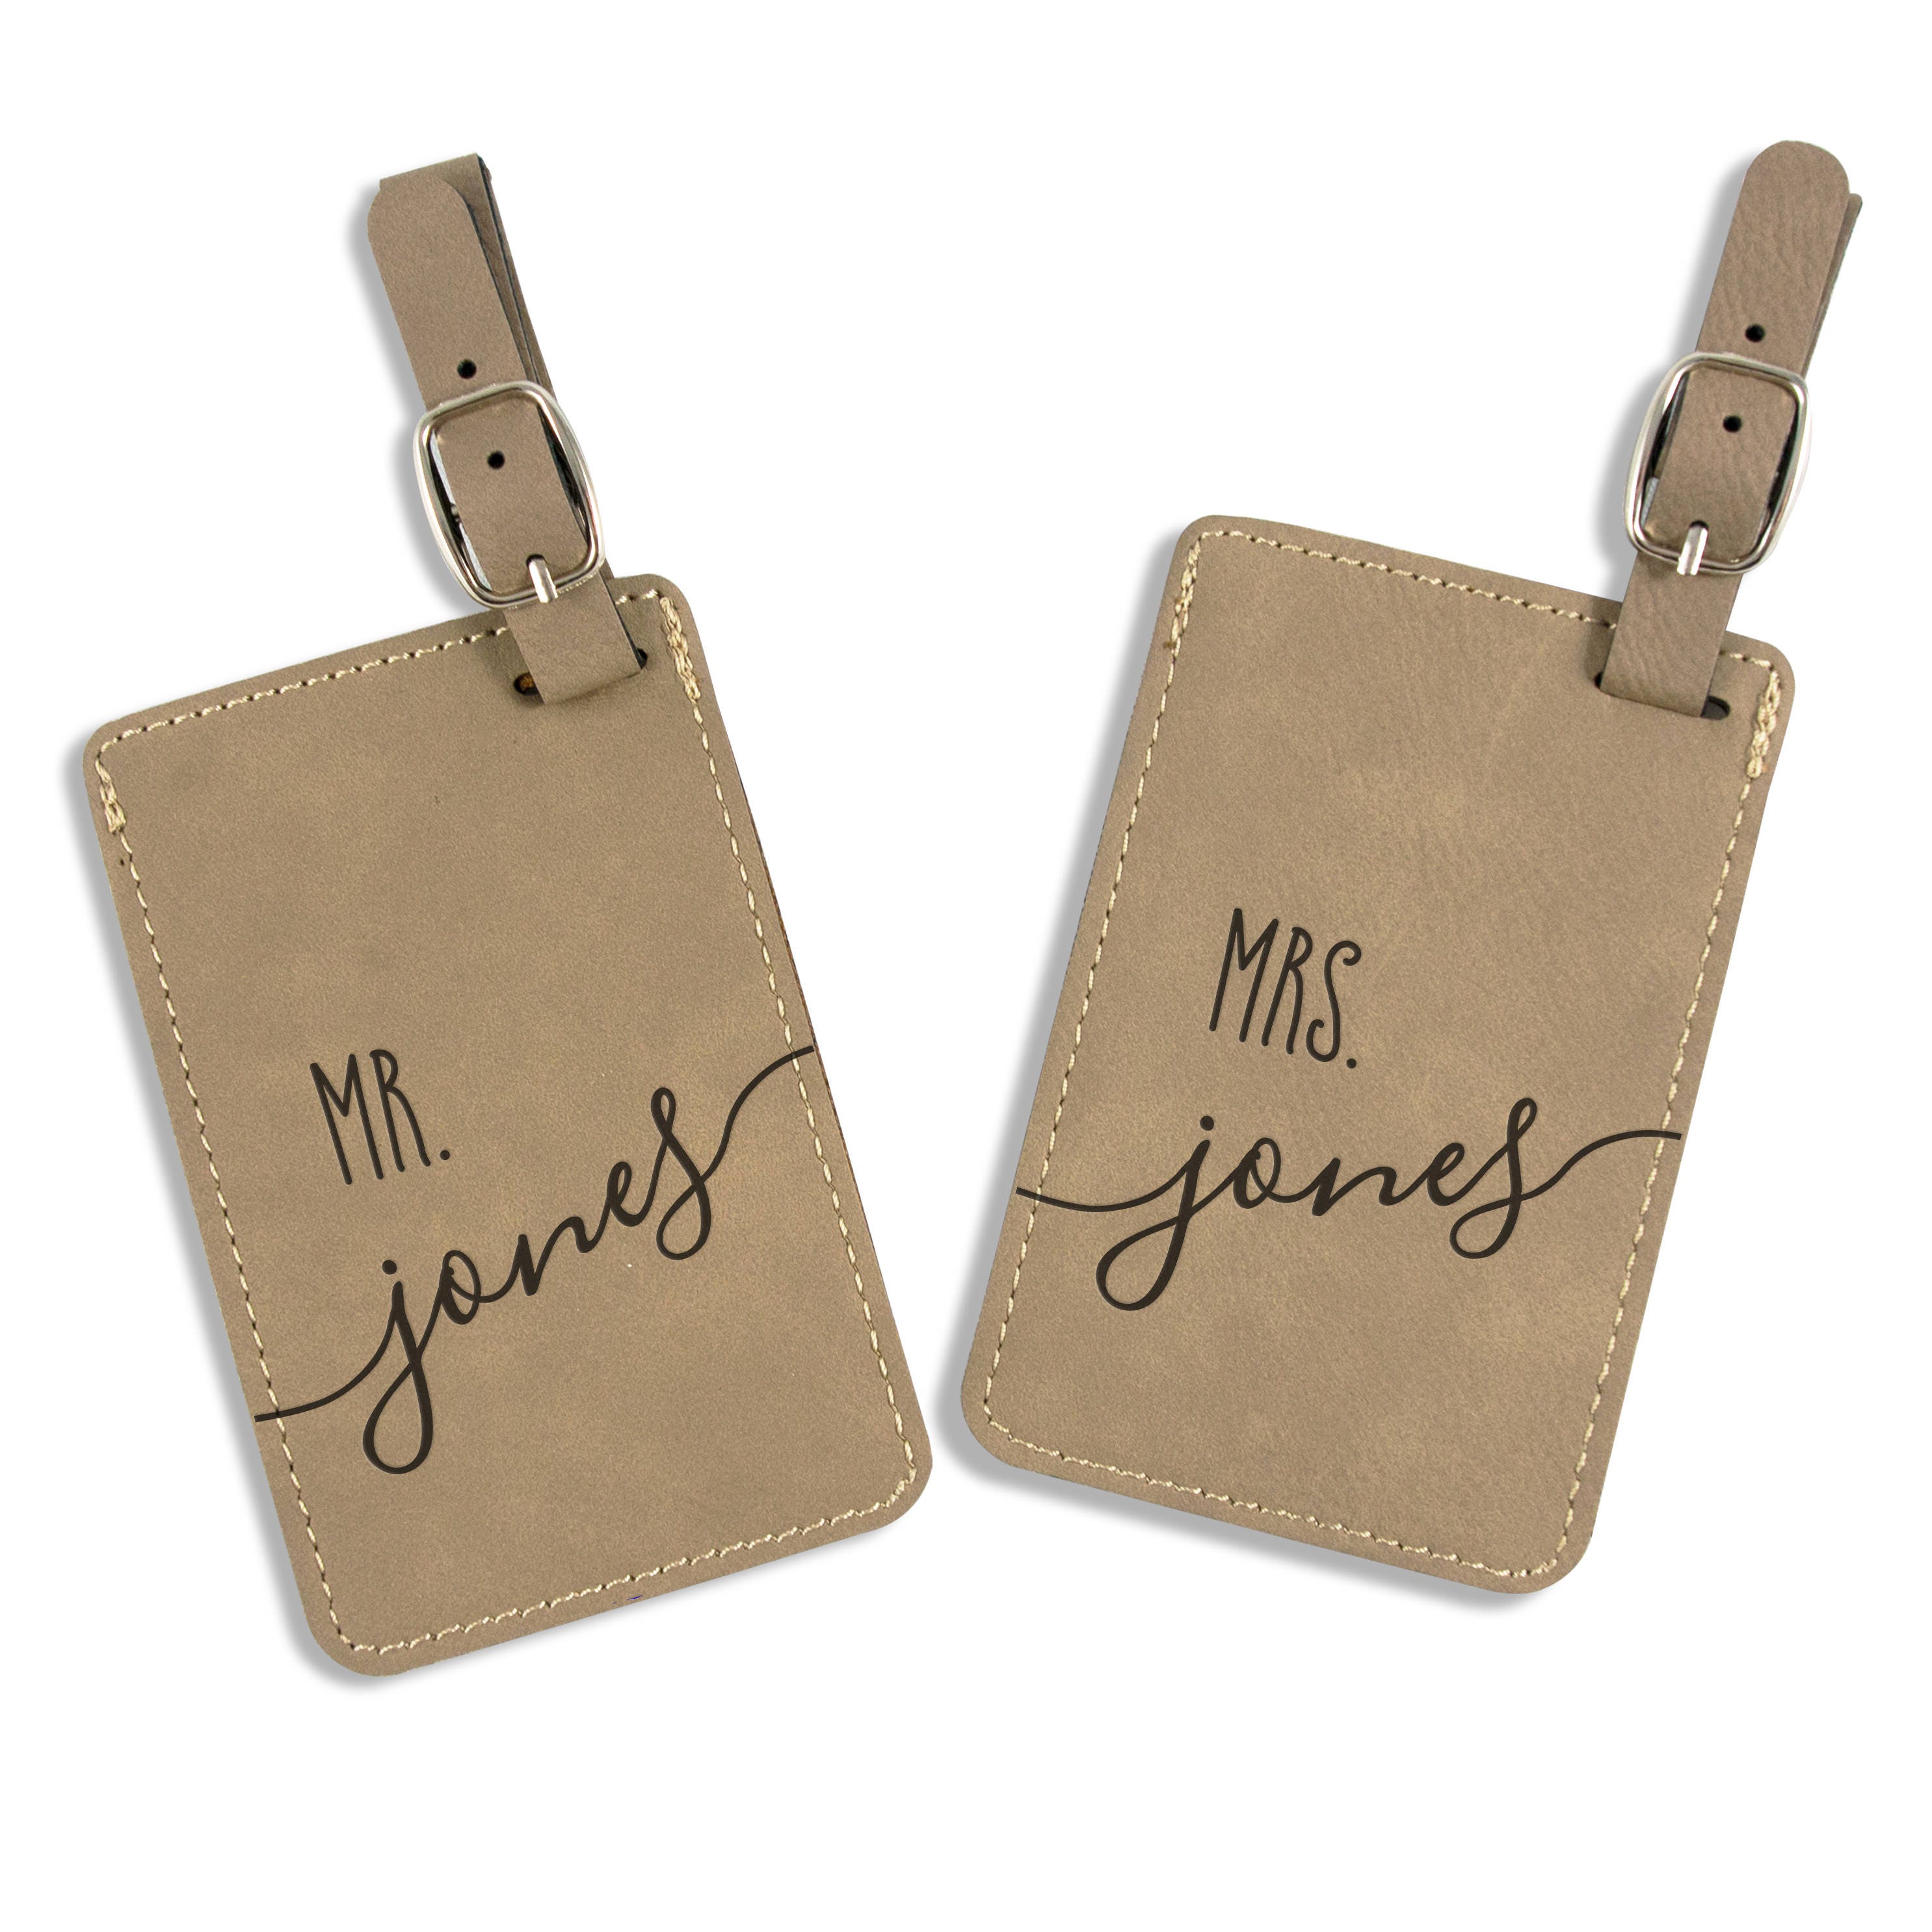 Wedding Gift Personalized Luggage Tag Leatherette Bag Tag